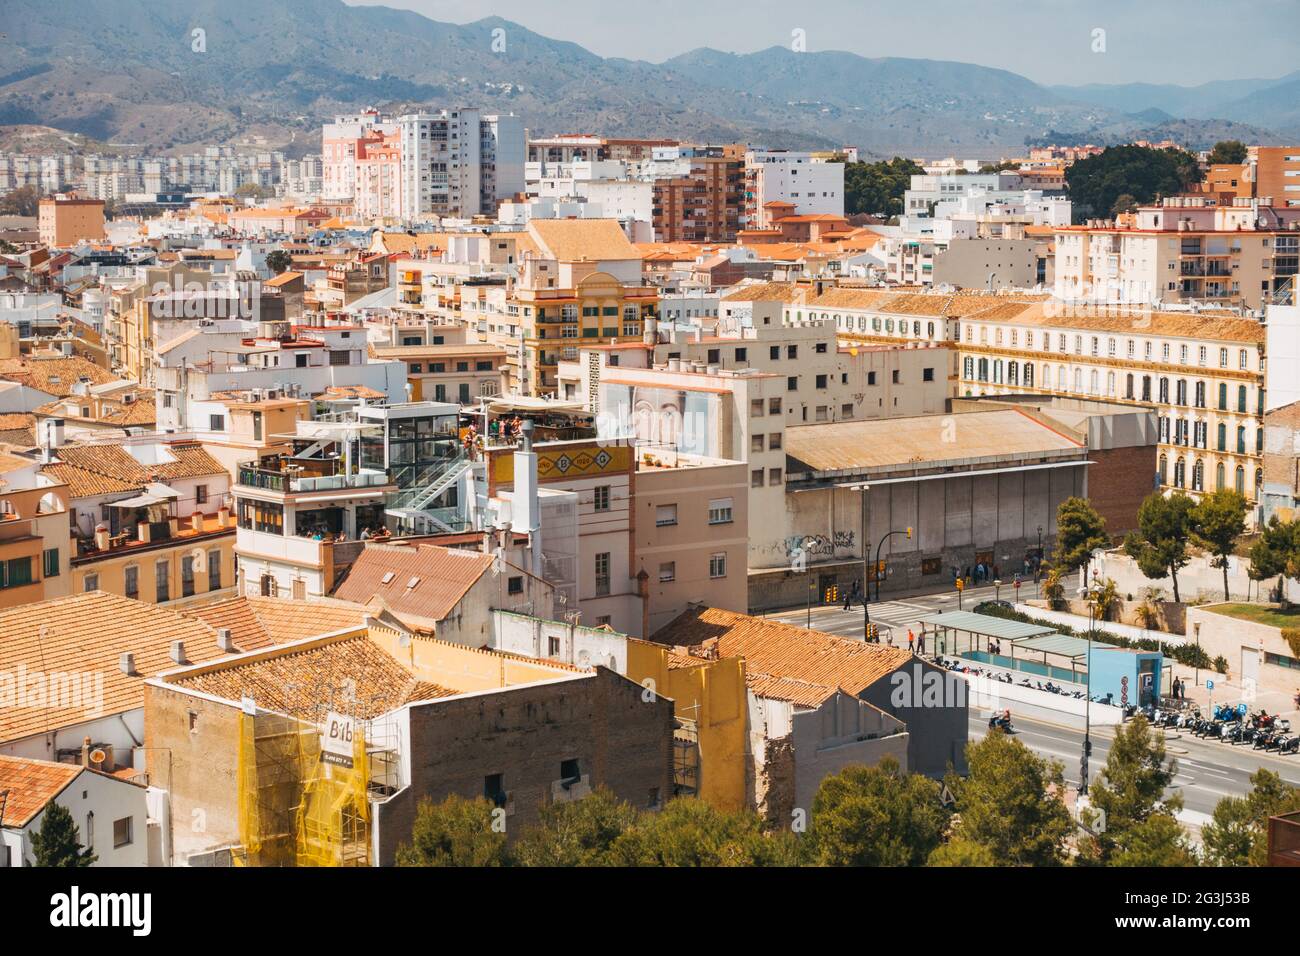 Peering out across the various pastel shades of white, yellow and terracotta of the city of Málaga, Spain Stock Photo